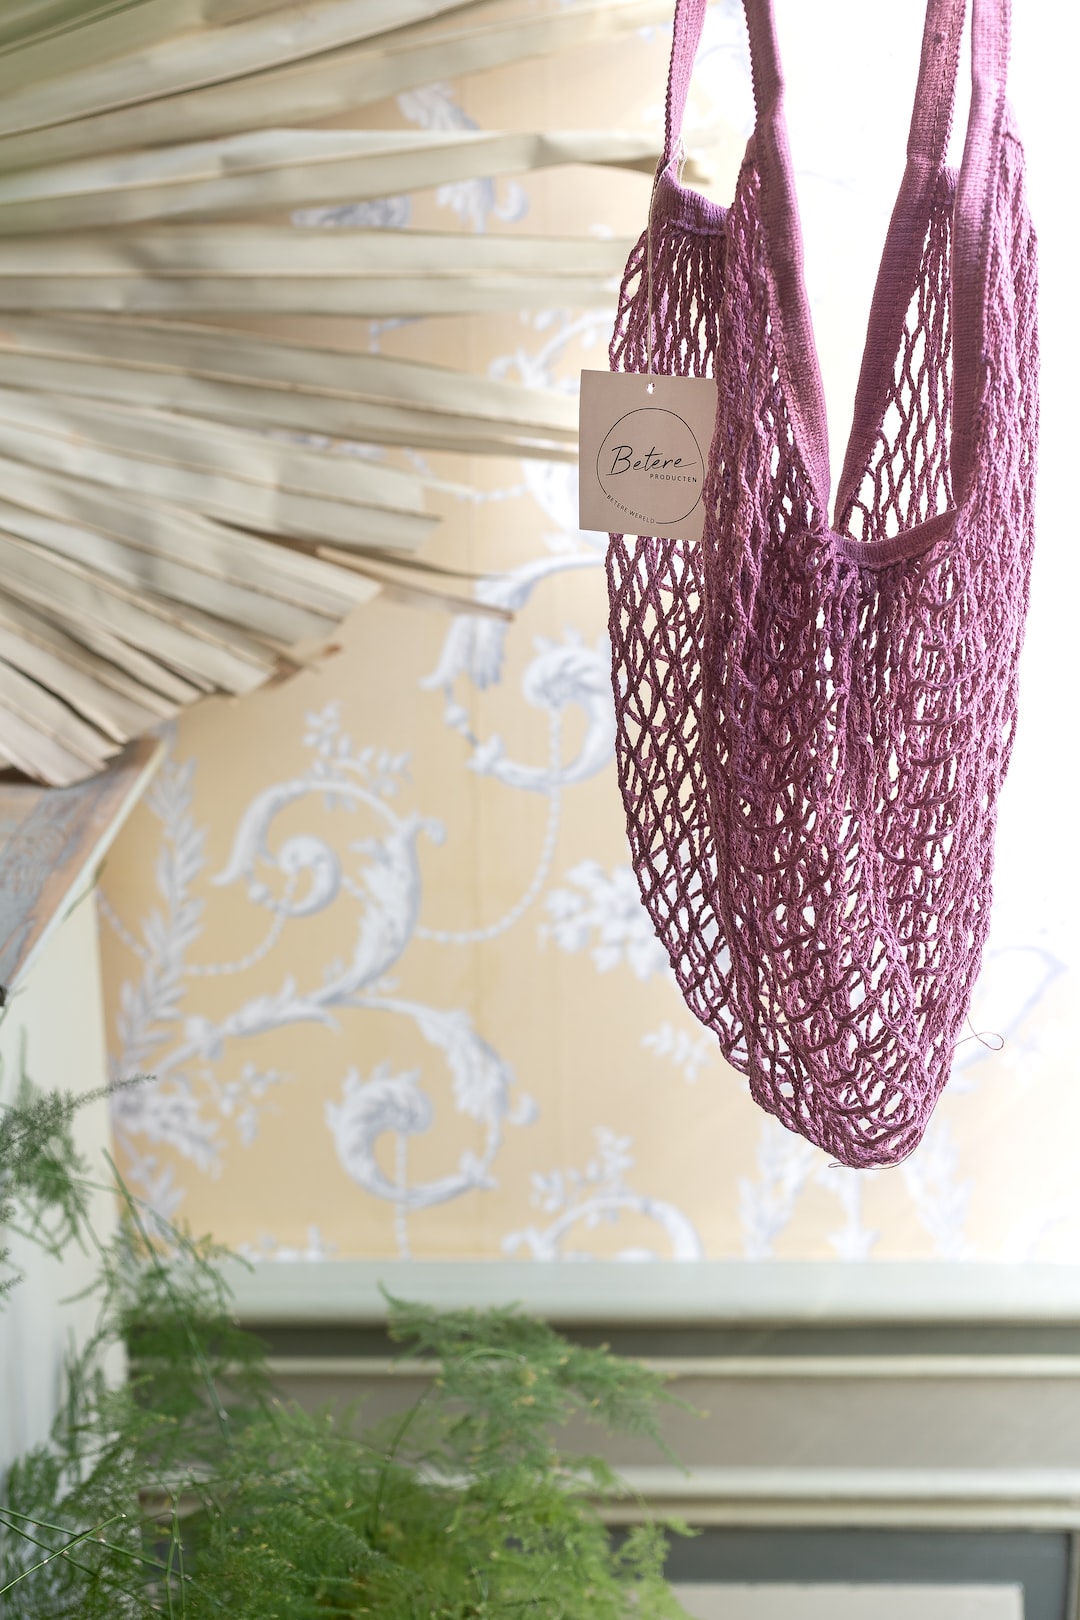 a purple bag hanging from a ceiling next to a potted plant